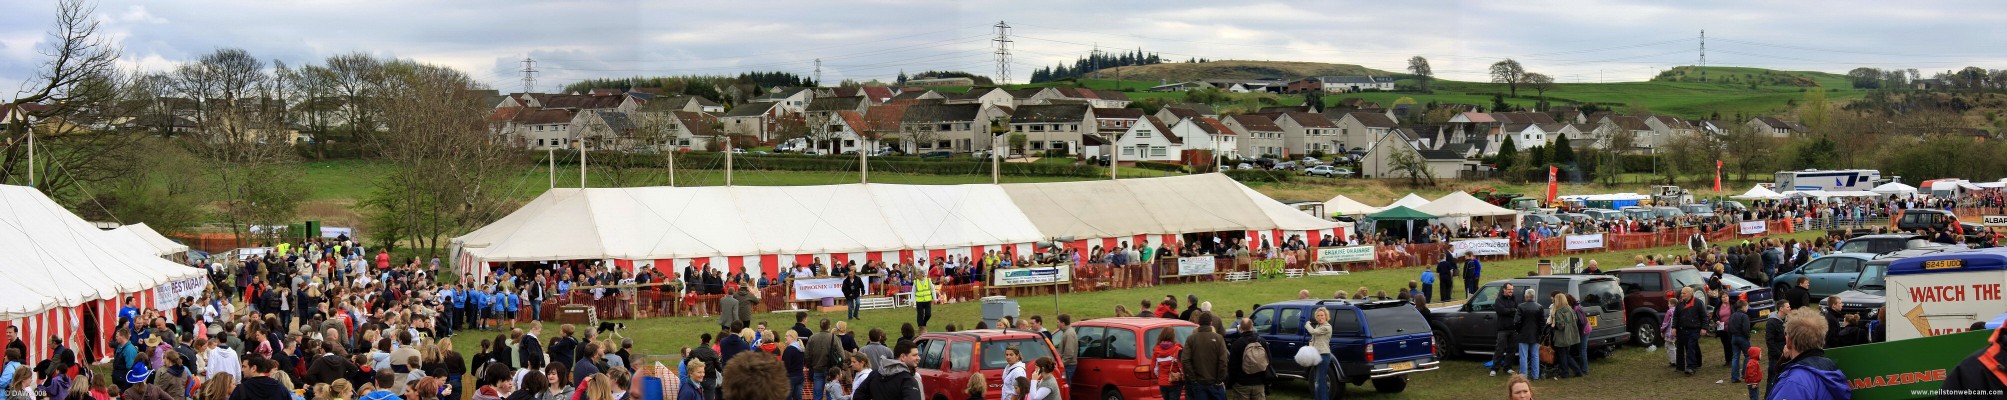 2008, panoramic view over The Neilston Show
